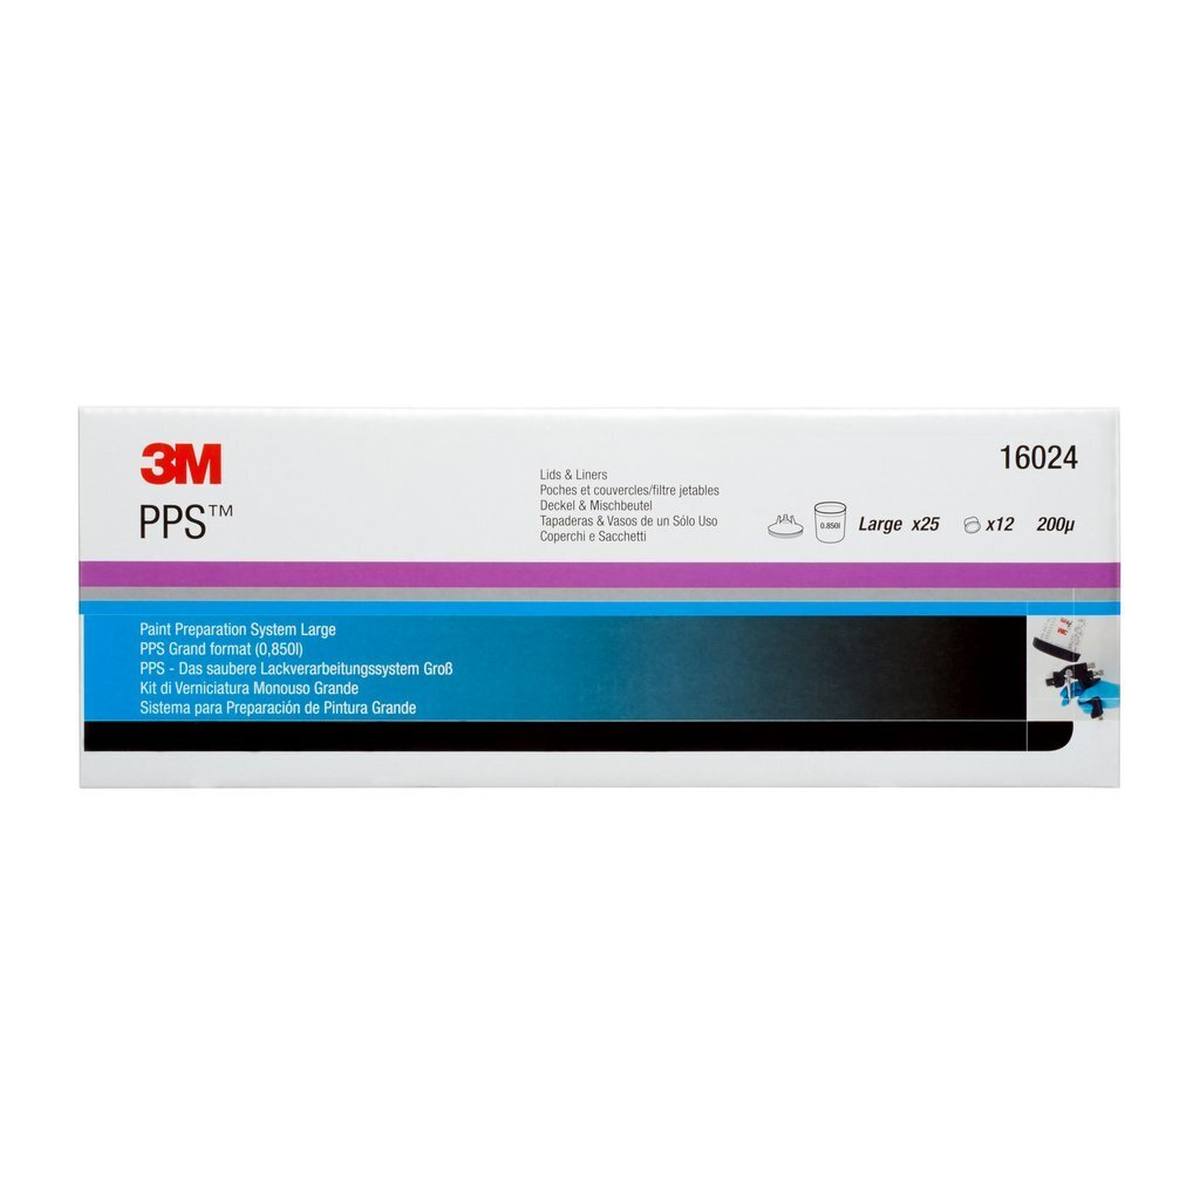 3M PPS Kit filter 200my, 25 bags &amp; 25 lids incl. filter &amp; 10 storage caps 0.85l #E16024